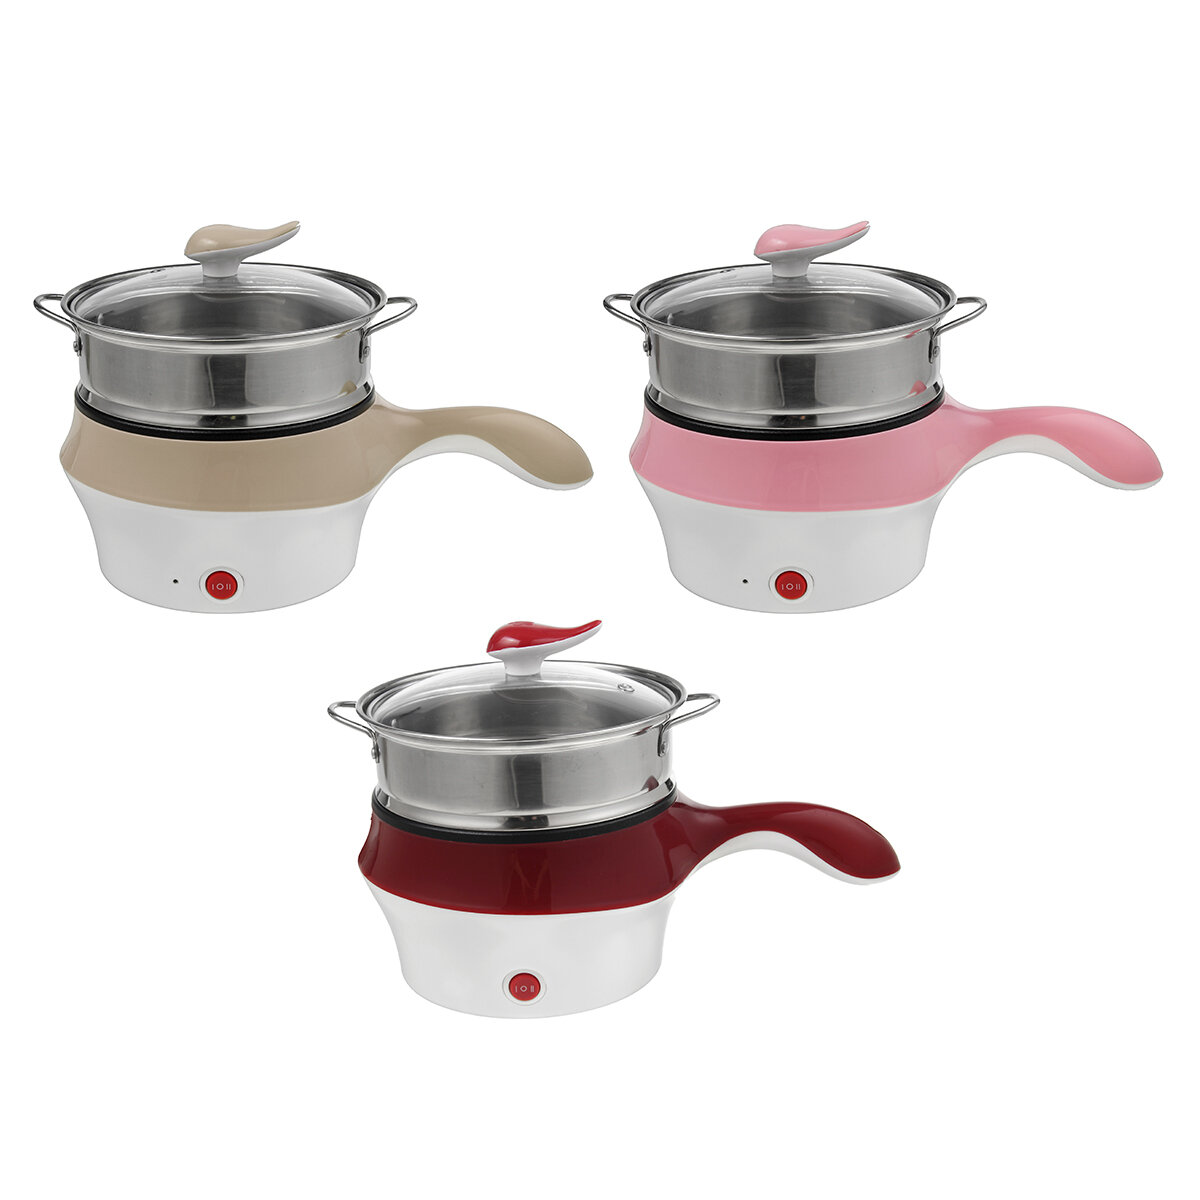 Image of 300W 220V Multifunction Cooker Non Sticky Pan Fried Steam Double-Layer Cooker Mini Electric Pot Pan Fry